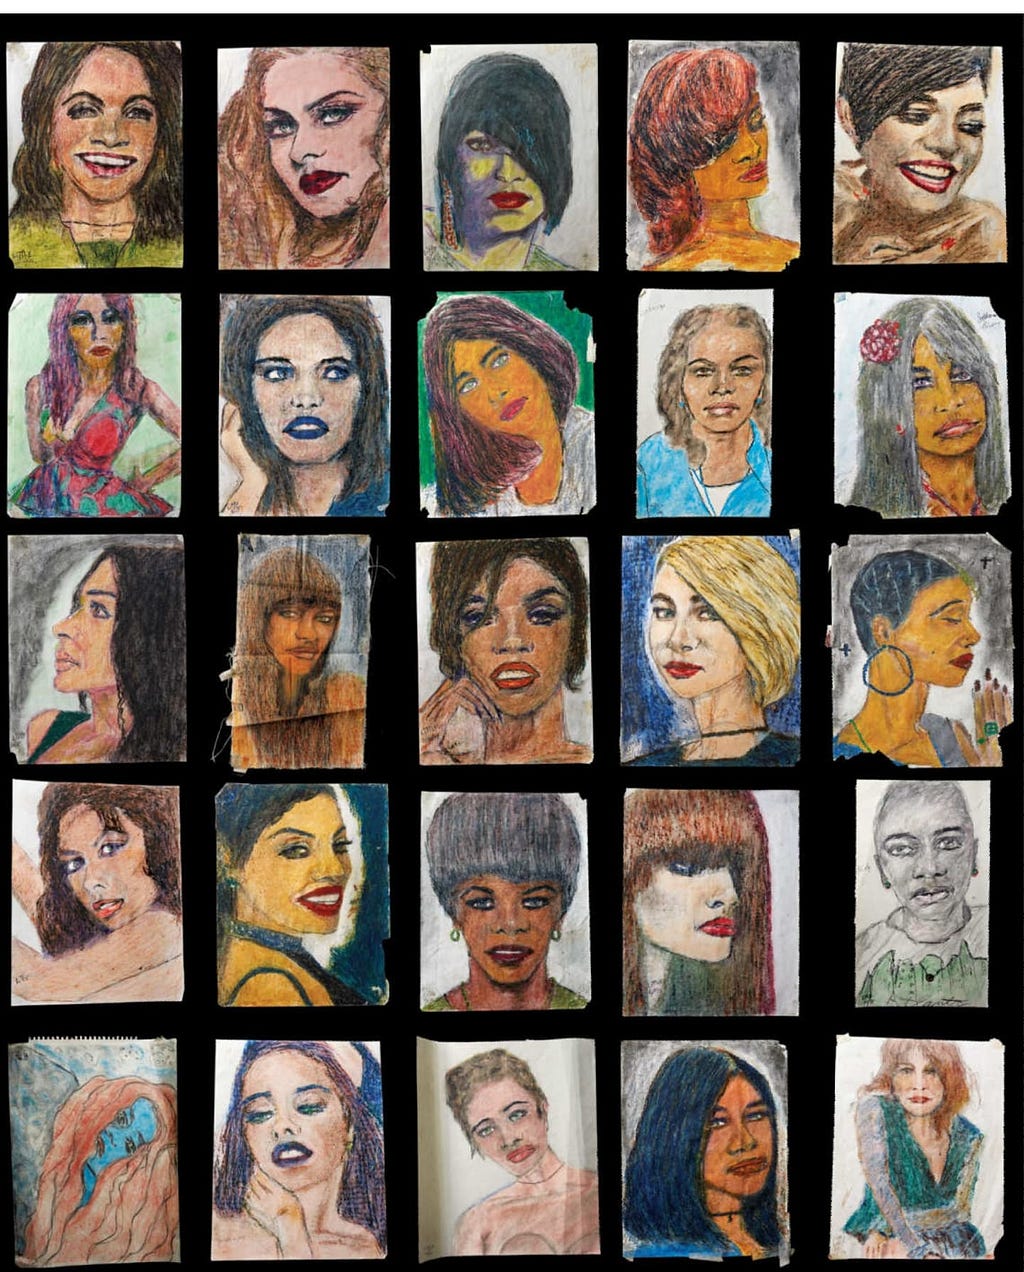 Several of the Drawings of the Murdered Women by Sam Little